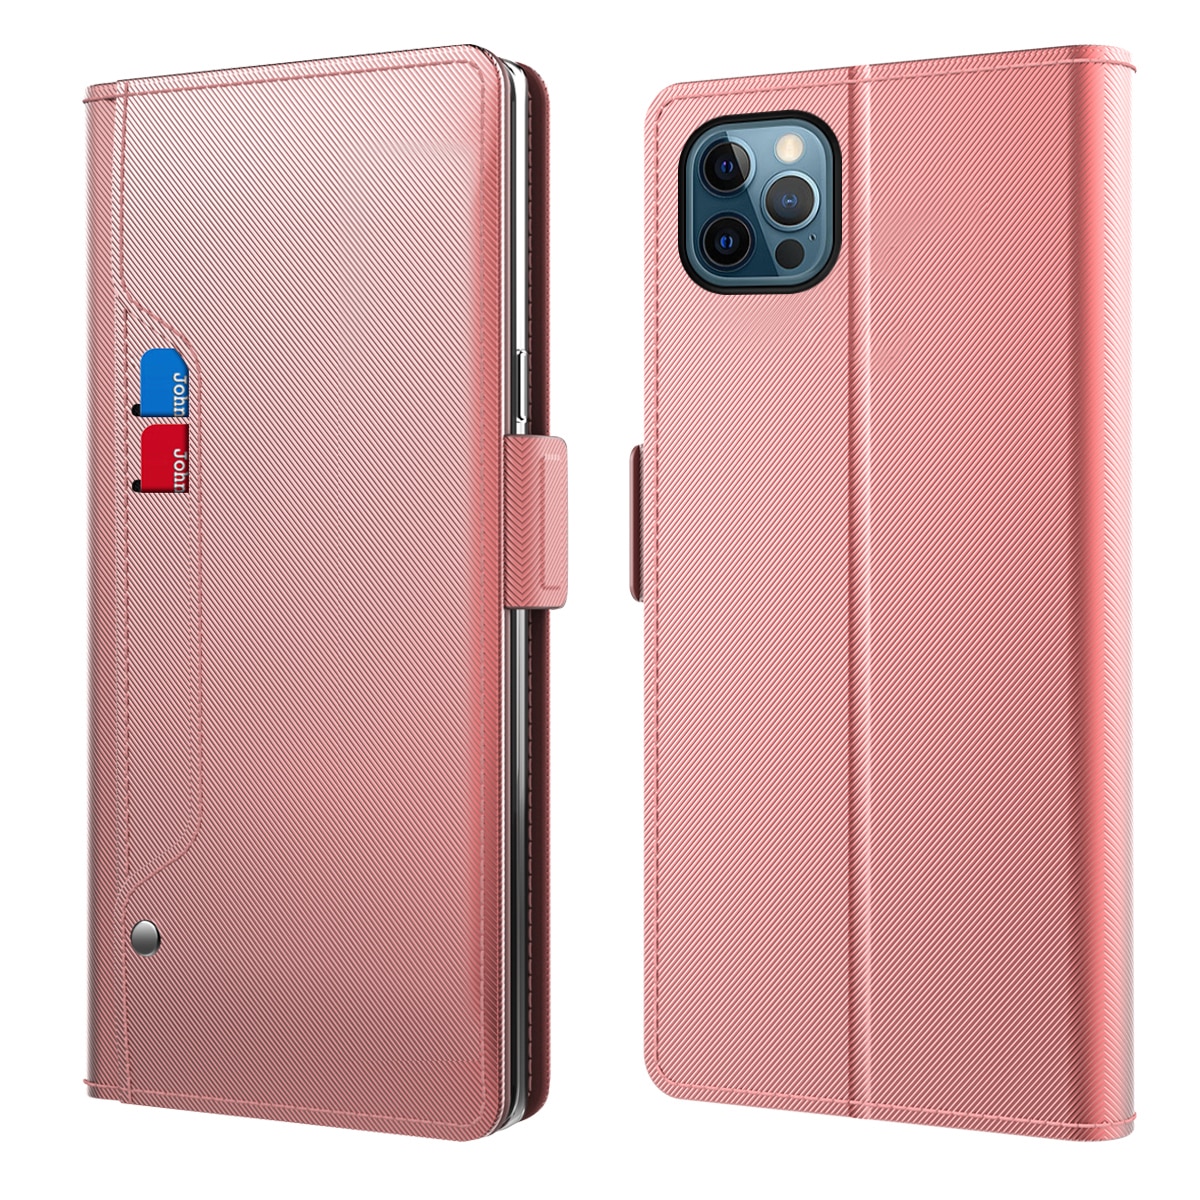 iPhone 13 Pro Max Wallet Case Mirror Pink Gold